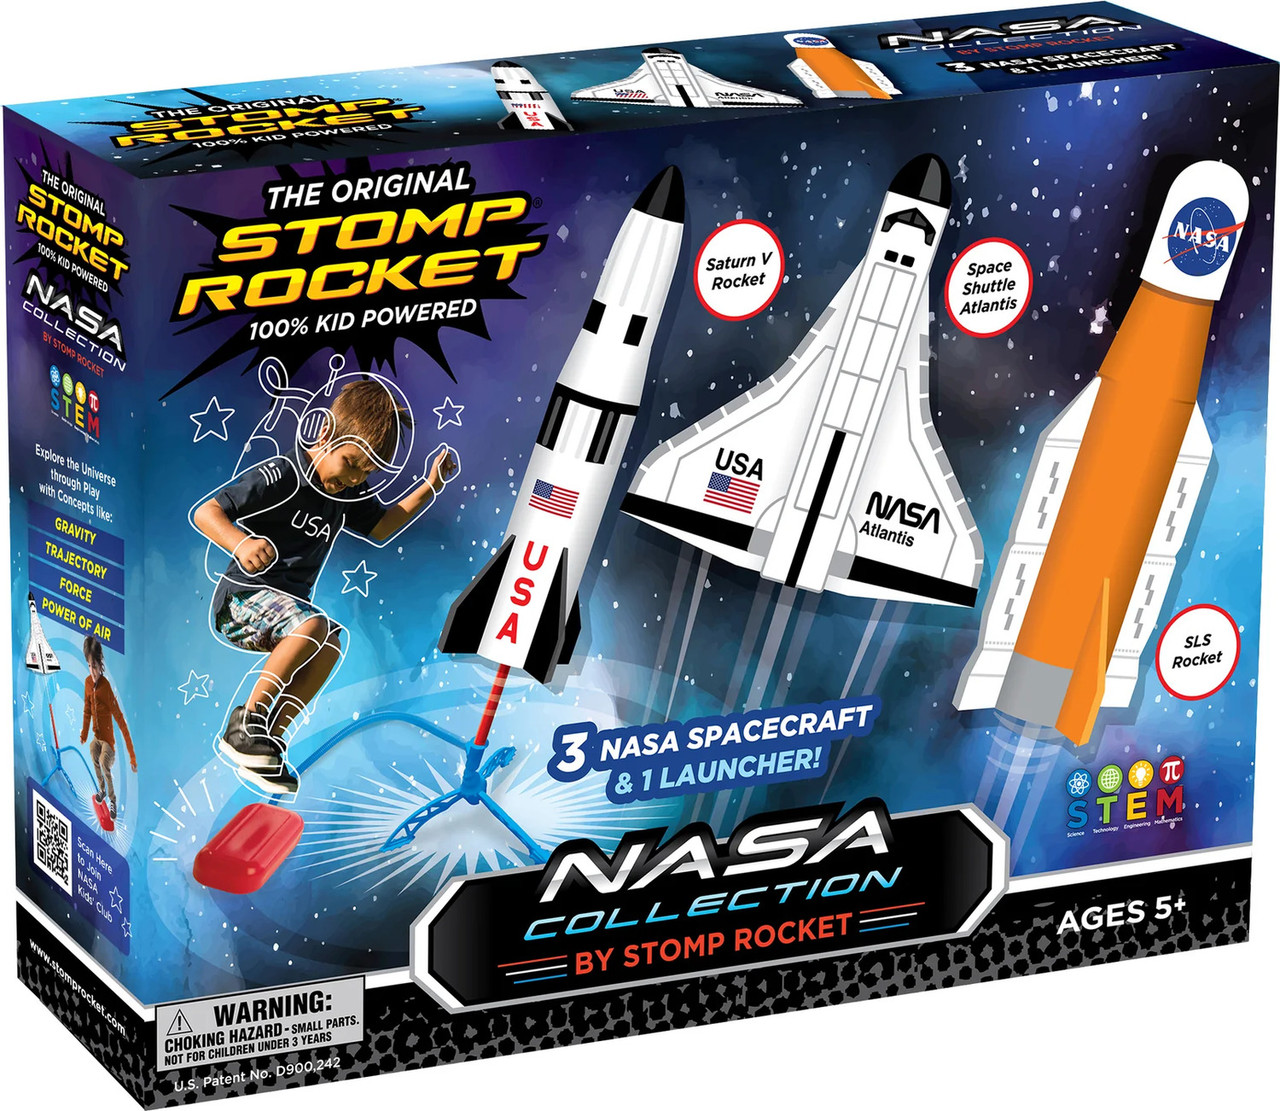  Stomp Rocket Space Collection 1